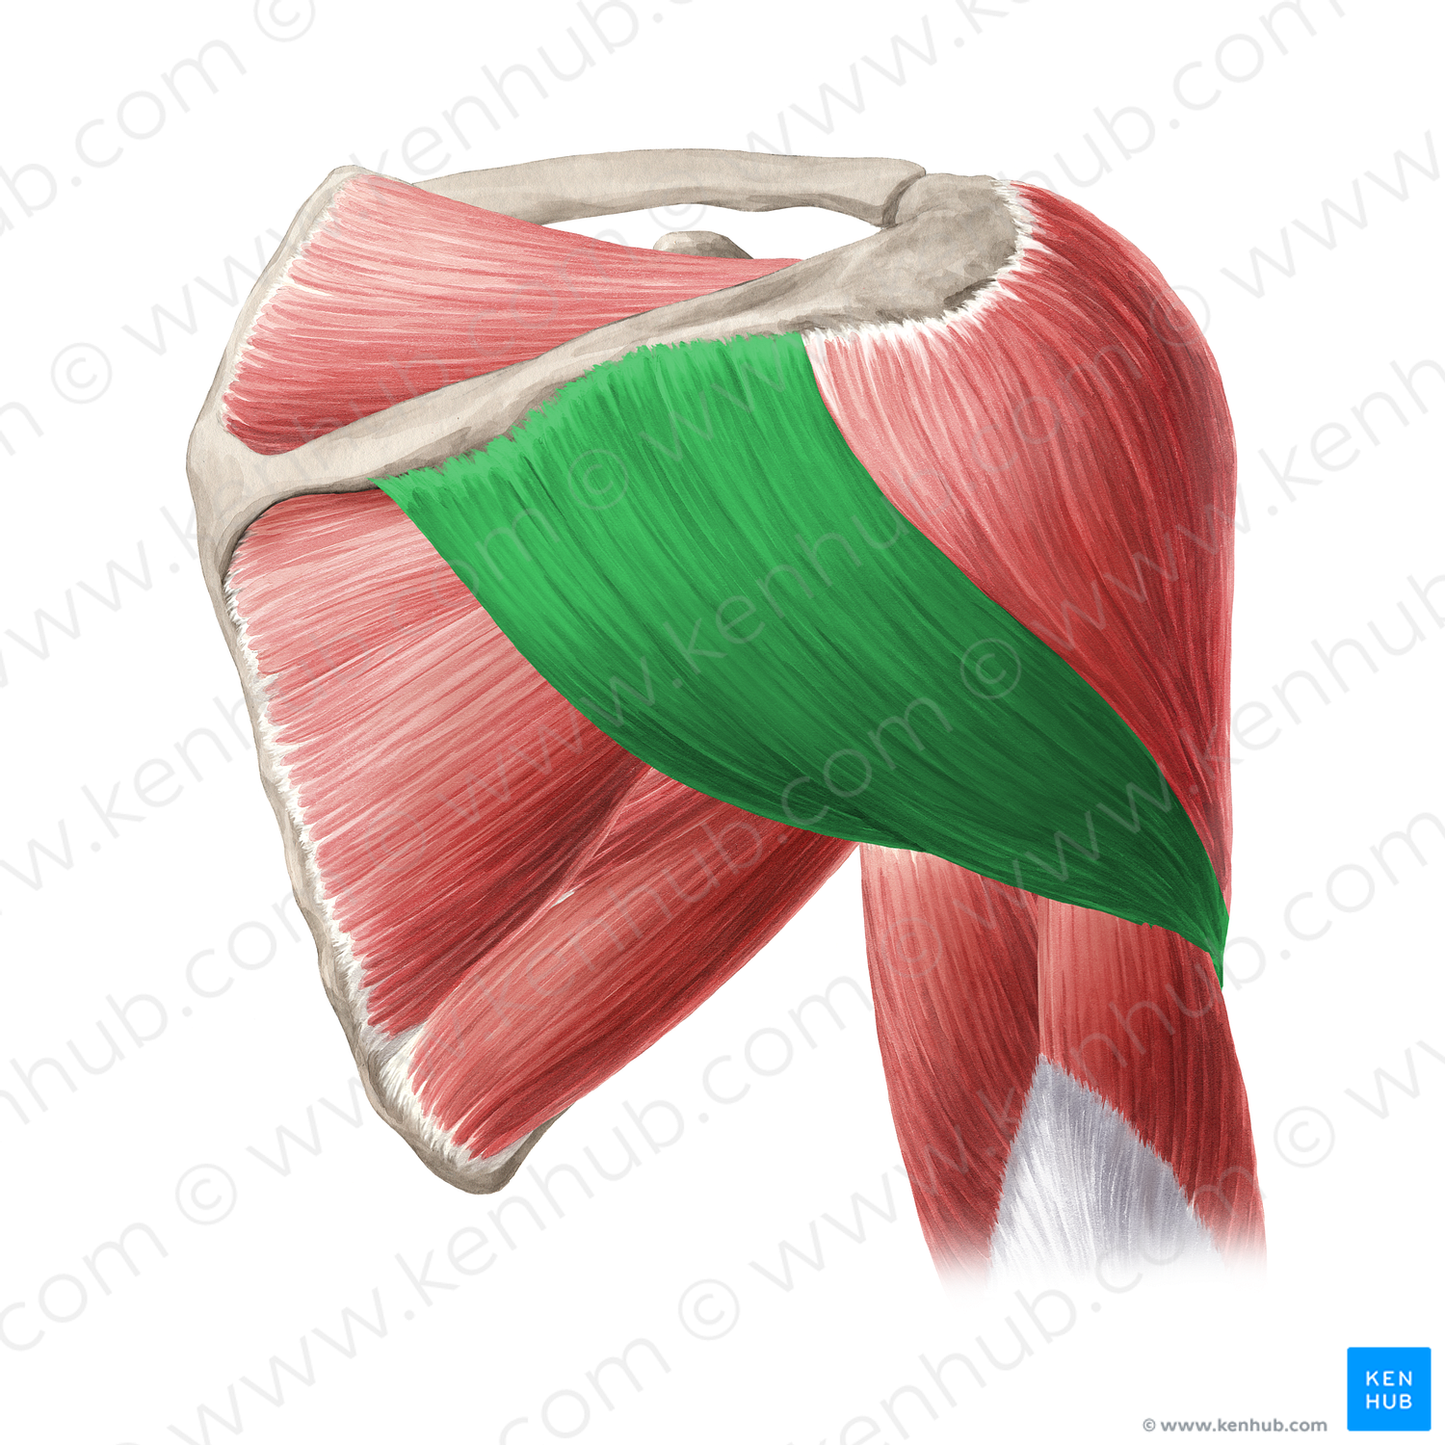 Spinal scapular part of deltoid muscle (#20329)